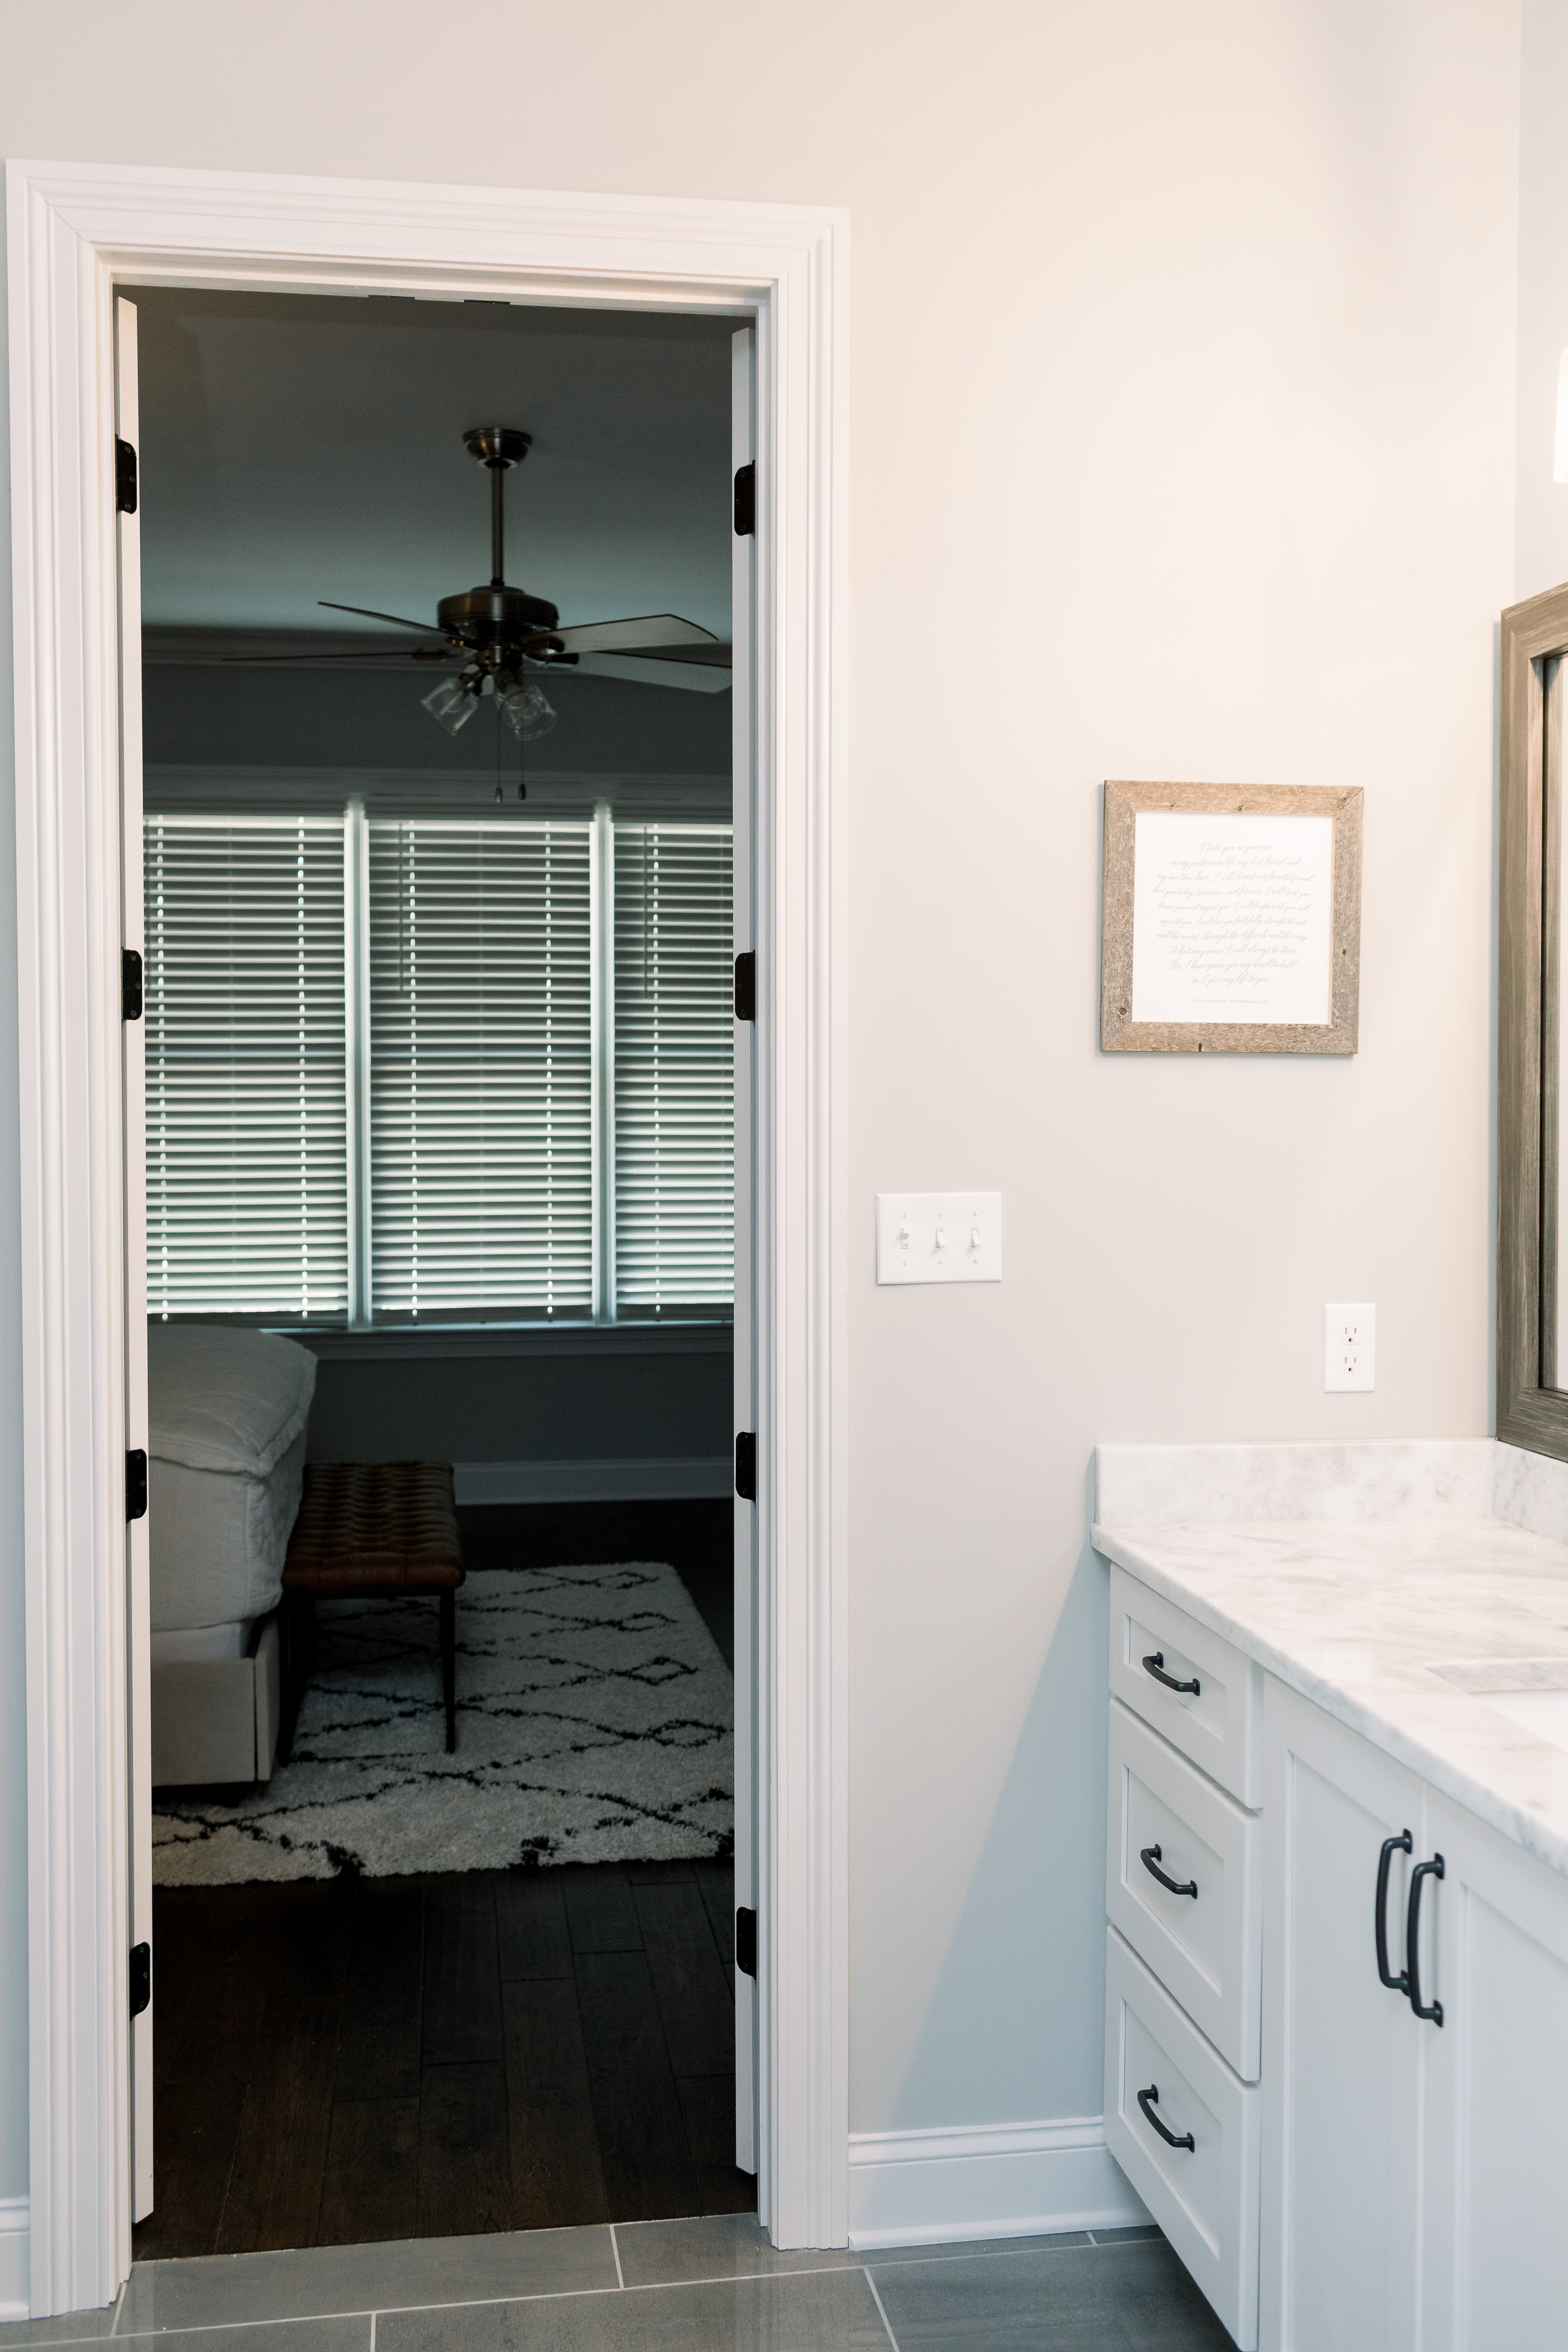 Our Relaxing Master Bedroom & Spa Inspired Bathroom featured by top Memphis lifestyle blog, Walking in Memphis in High Heels.